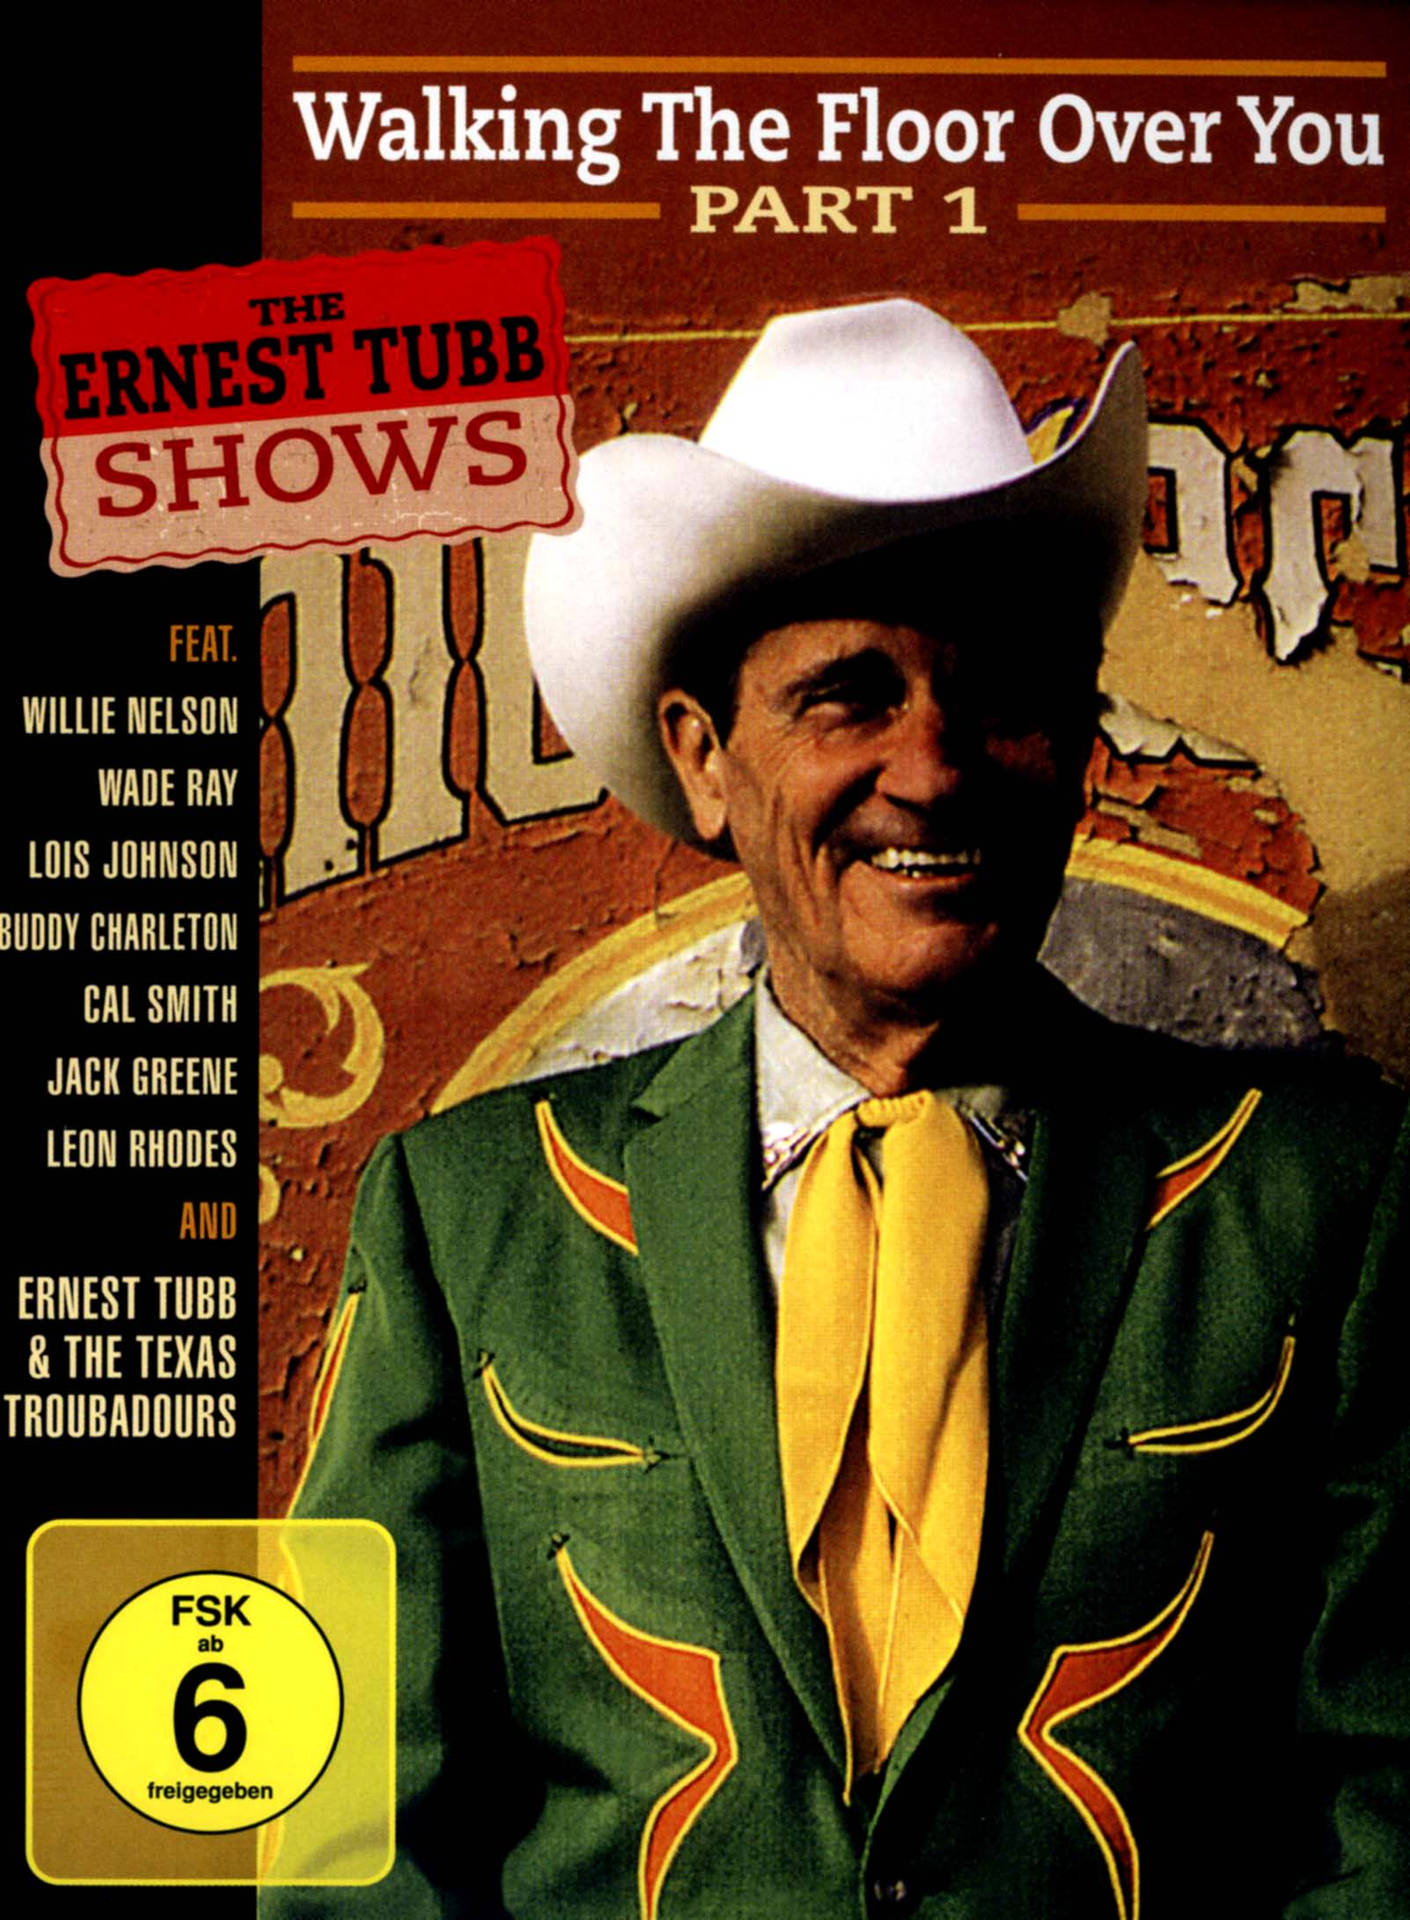 The Ernest Tubb Shows Poster Wallpaper